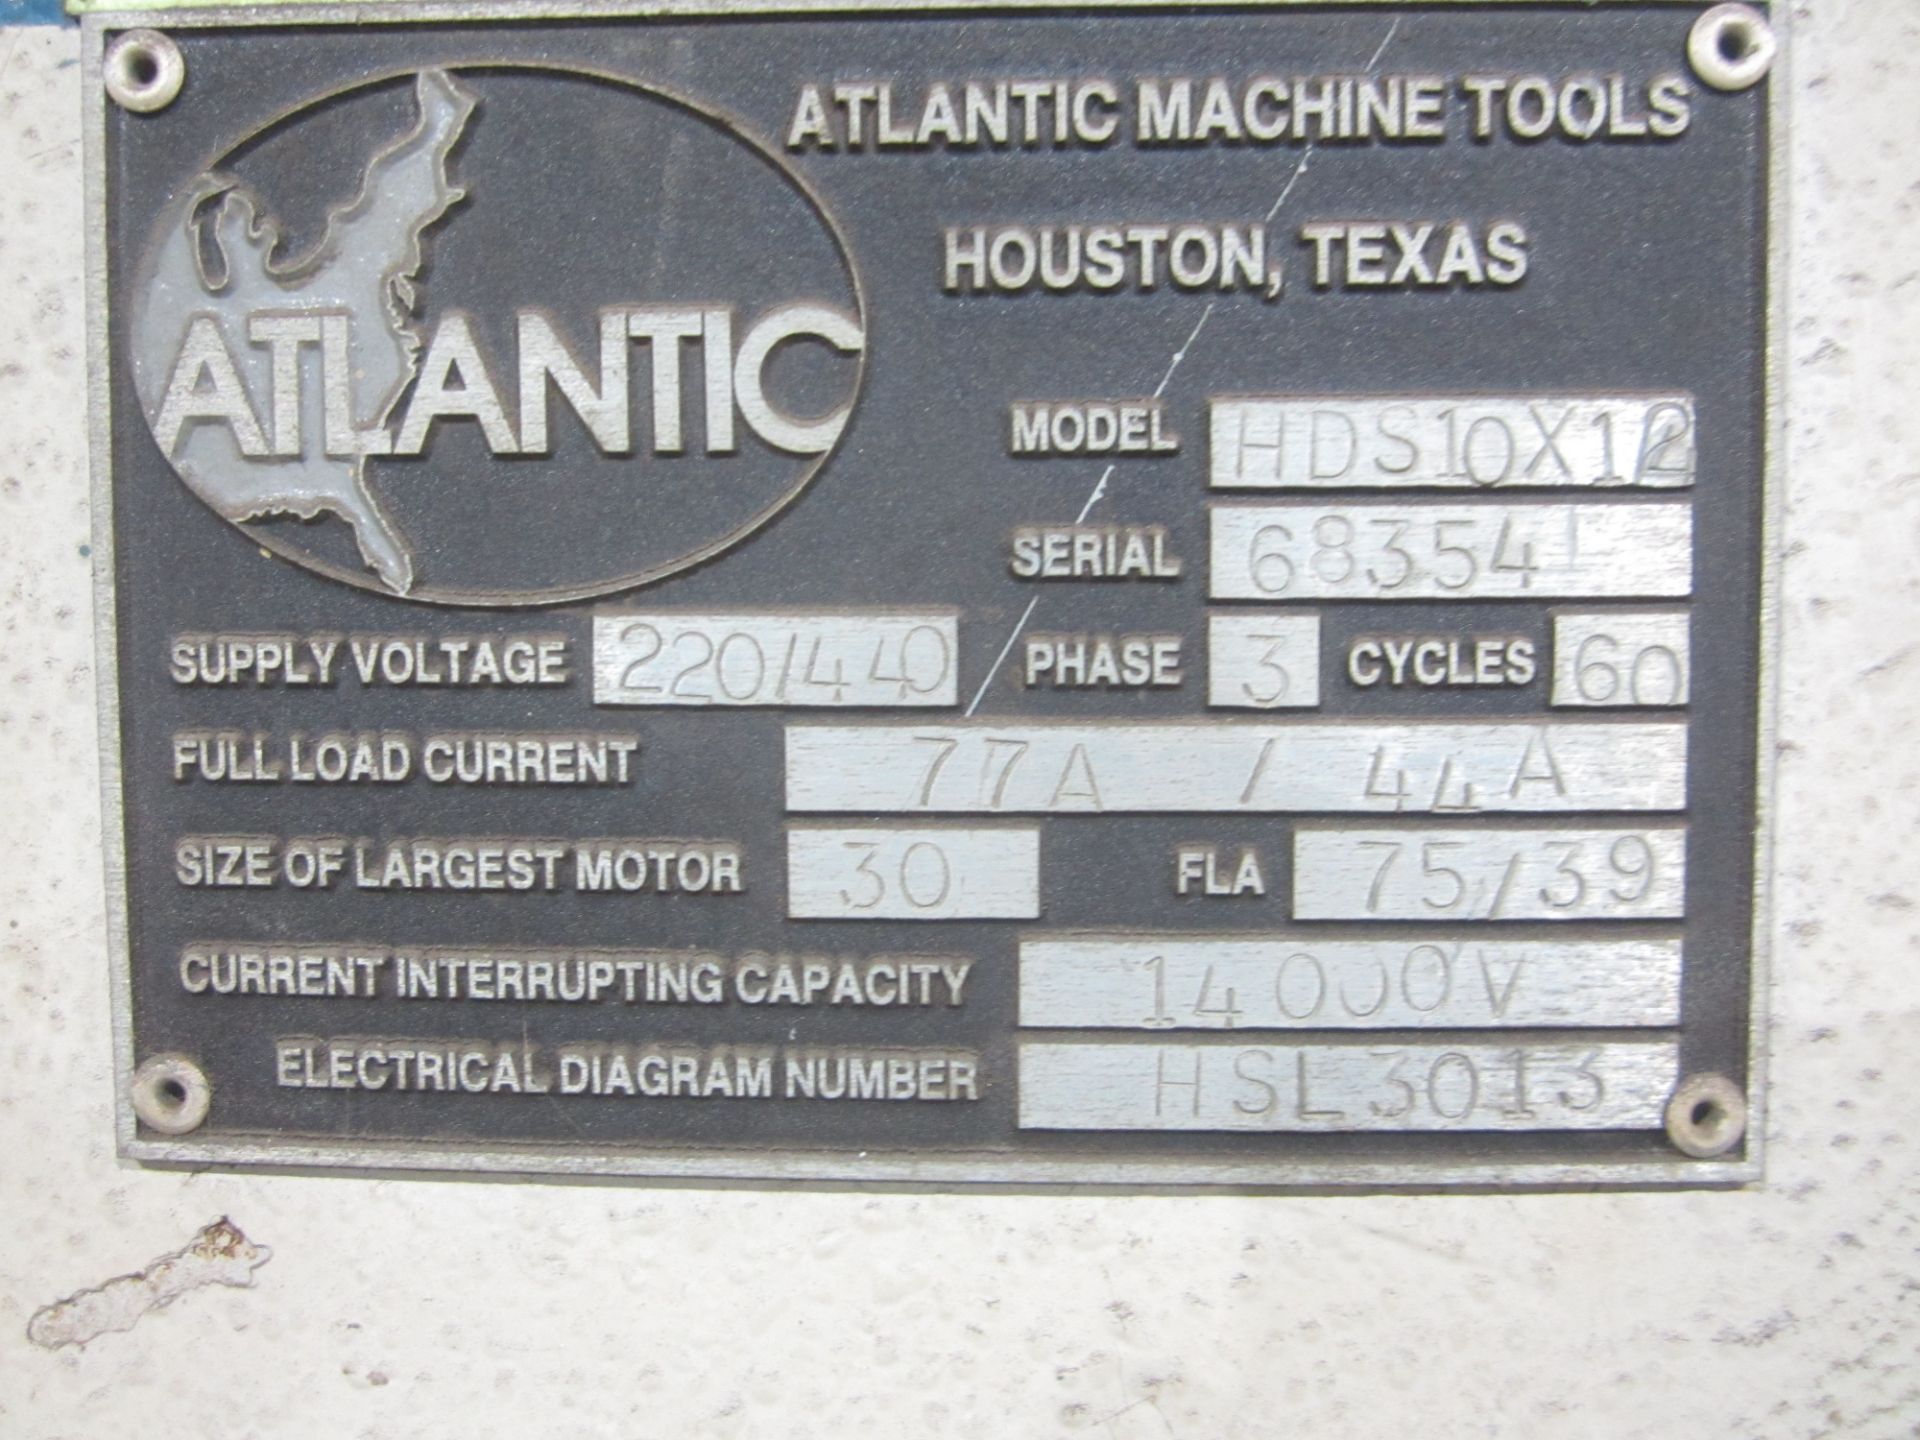 Atlantic Model HDS10'X 1/2" Hydraulic Plate Shear, s/n G8354, 10' X 1/2" Capacity, 36" Front - Image 10 of 10